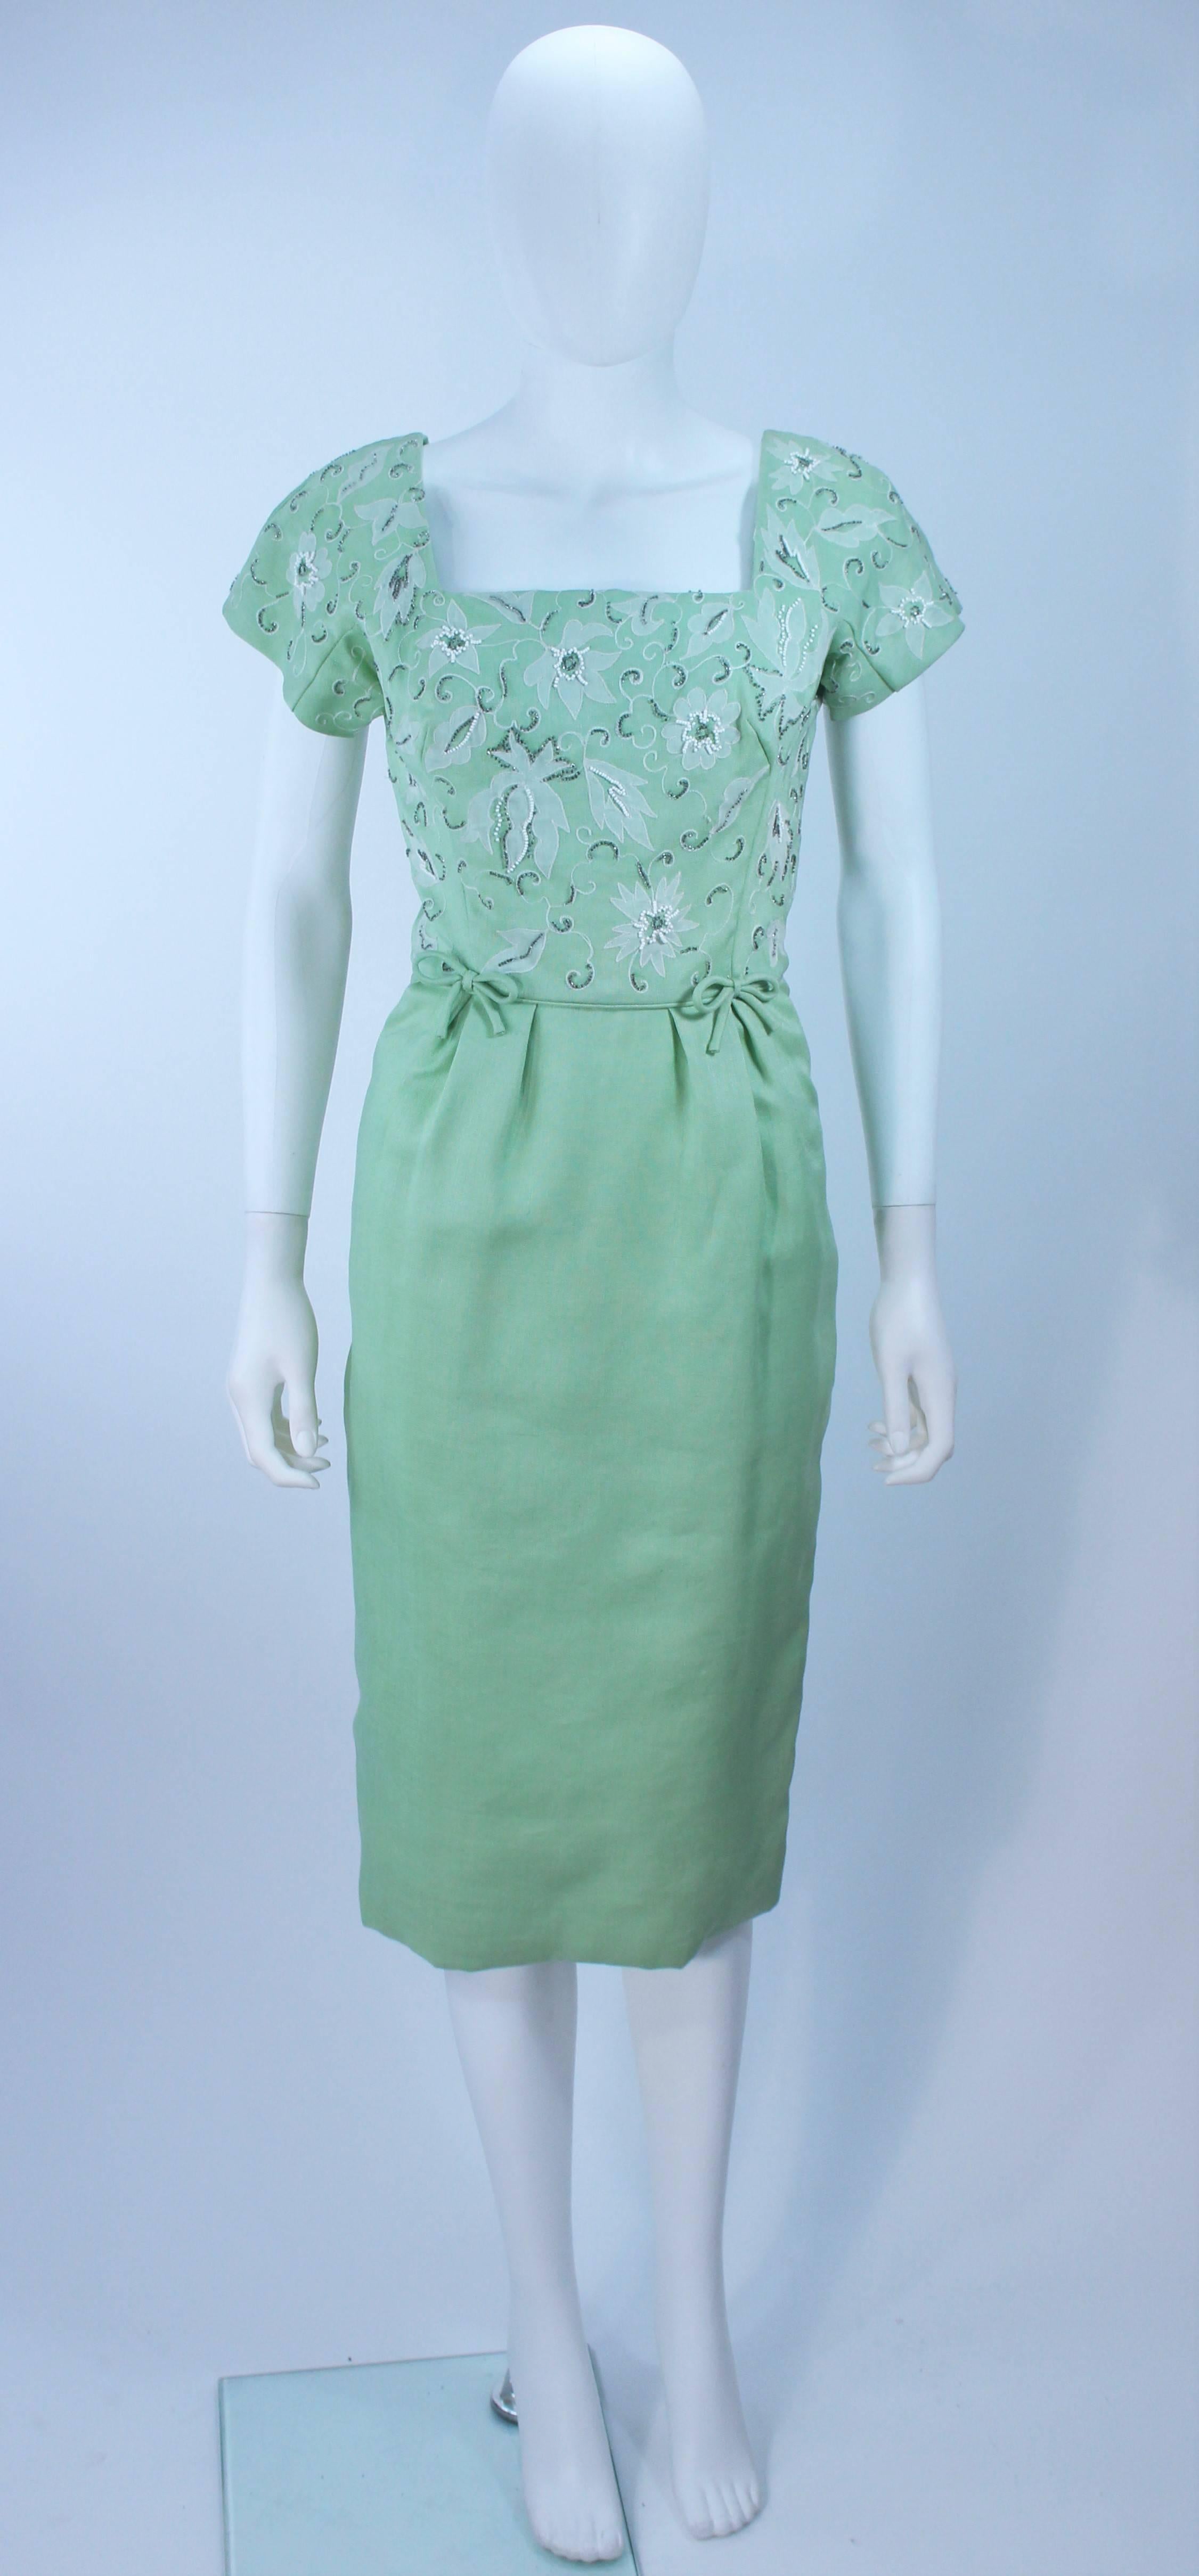  This dress is composed of a sage green silk or linen with white embroidery and beading. Features a scalloped edge design at the neckline, front bow details, and center back zipper closure. In excellent vintage condition.

  **Please